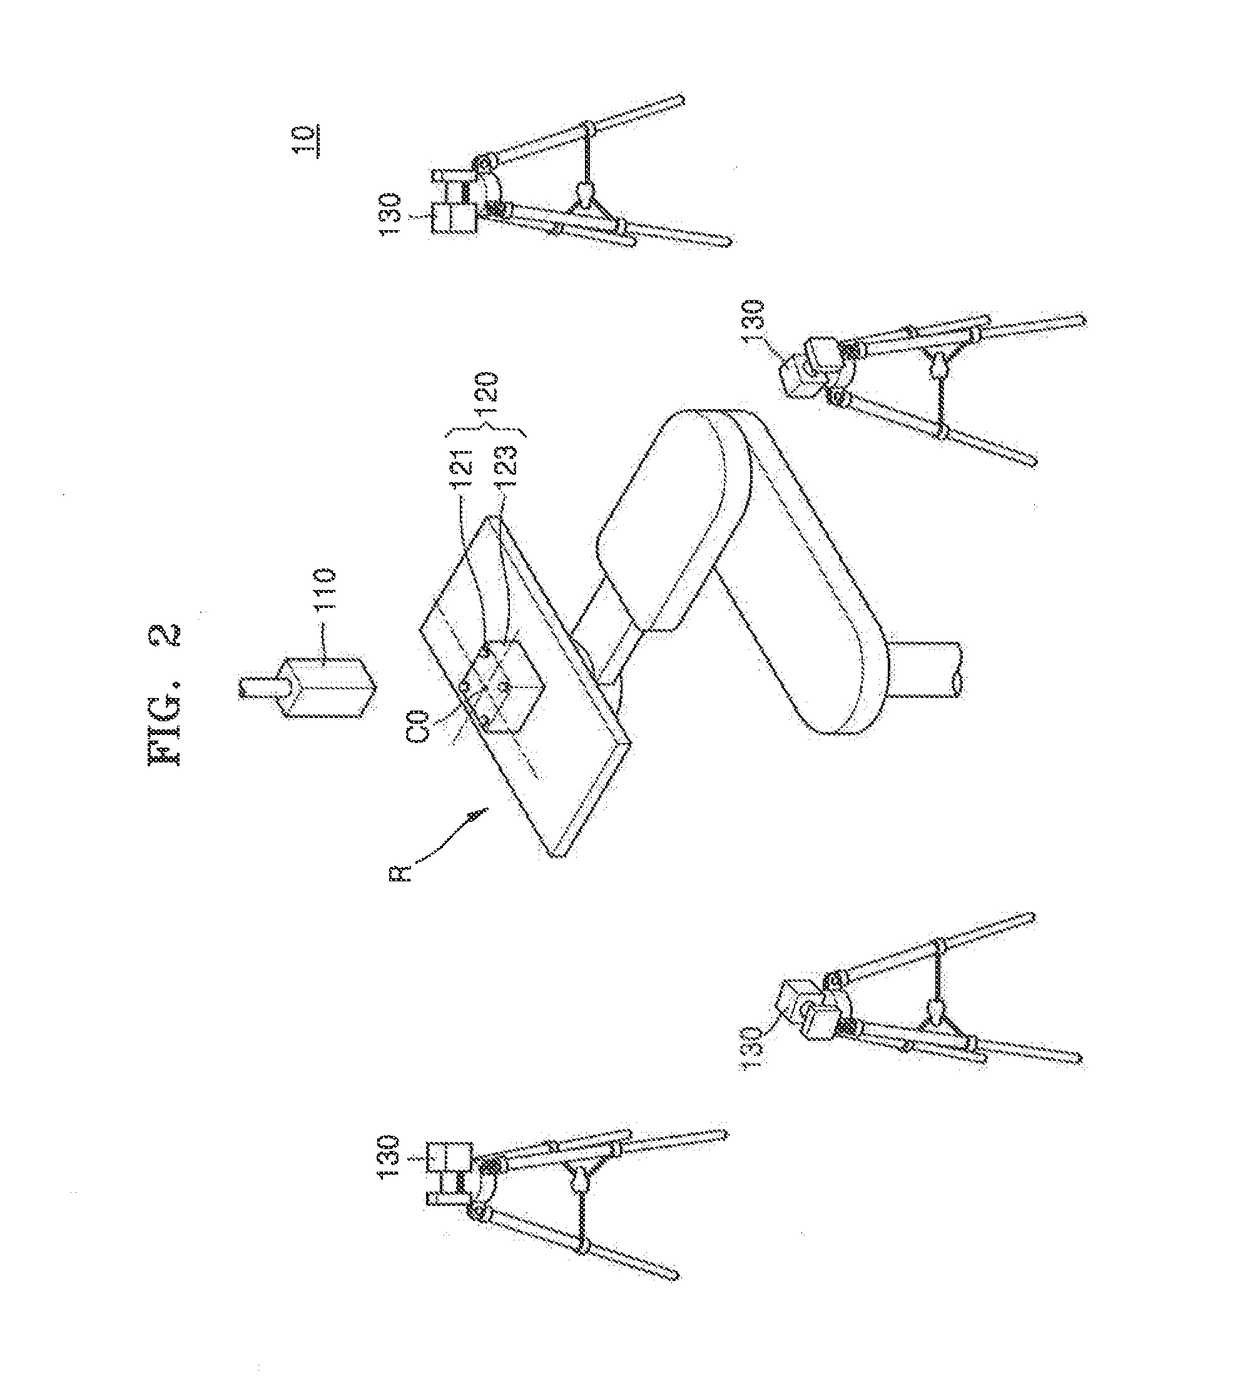 Motion Evaluation System and Method